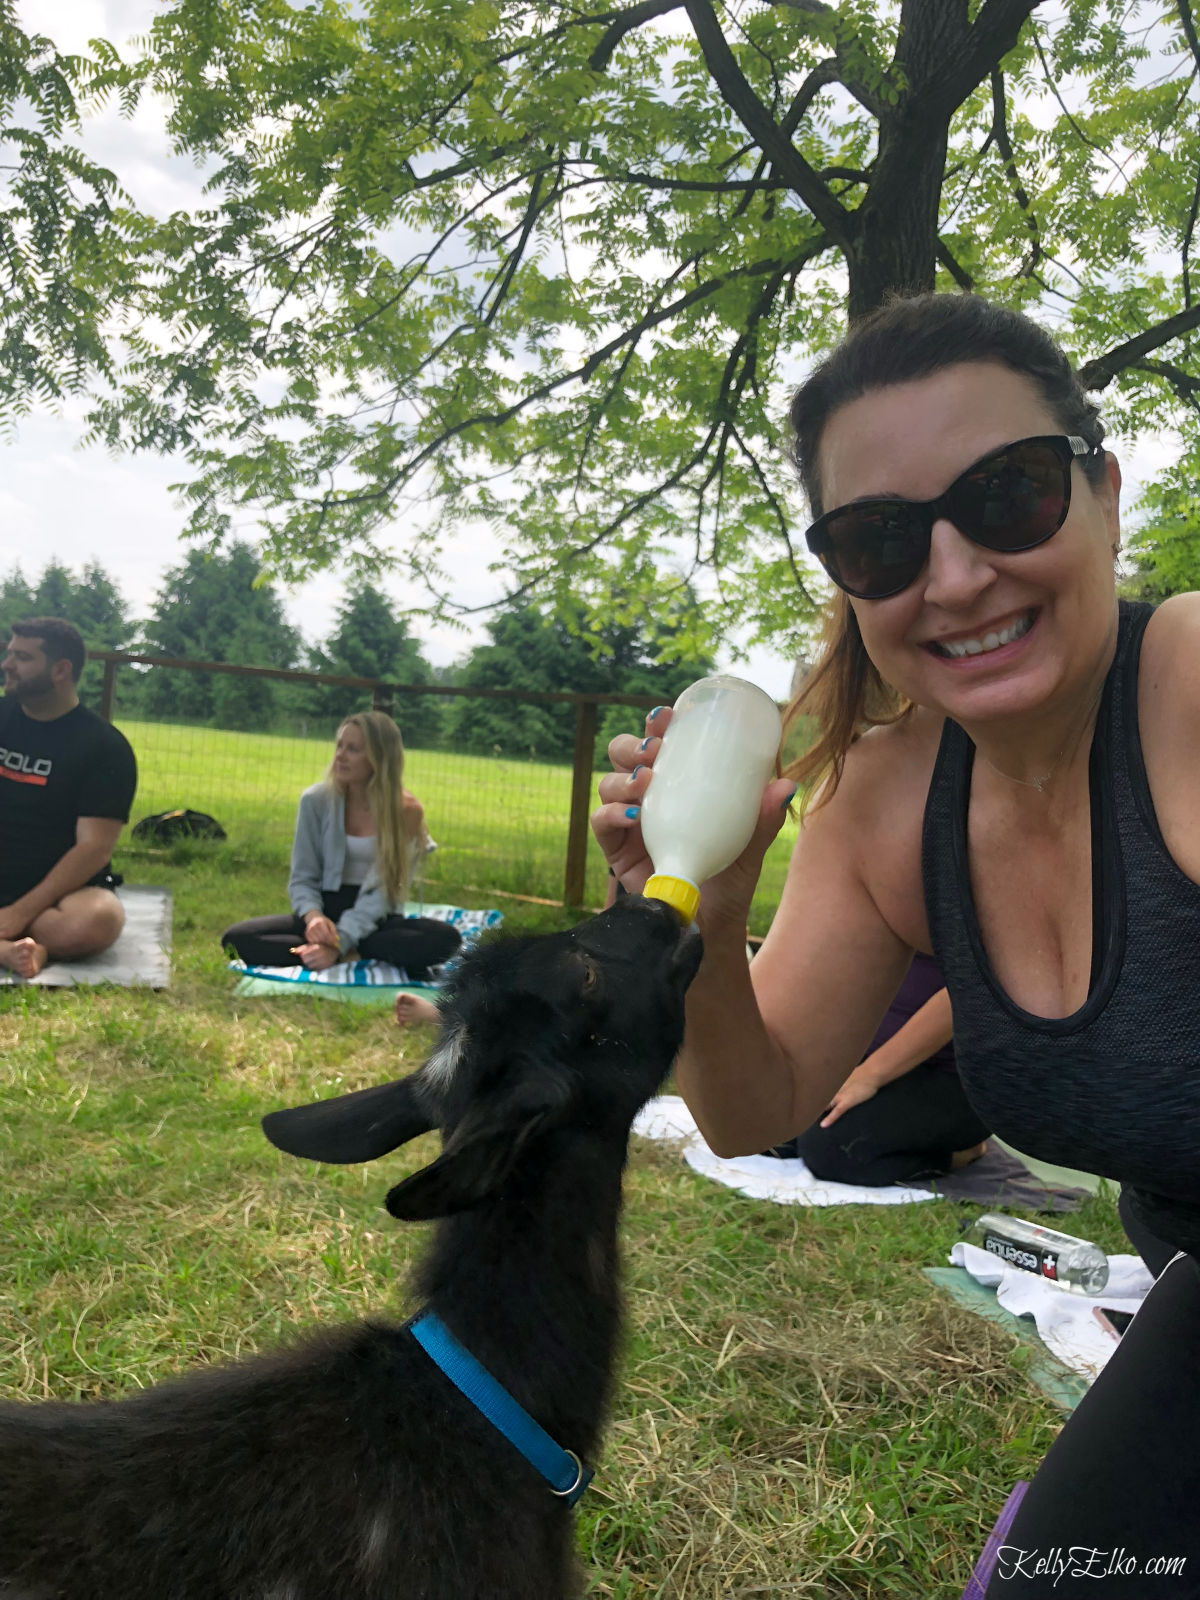 Goat yoga is all the rage and this place even lets you bottle feed the baby goats kellyelko.com #goatyoga #52weeksofyes #yoga 